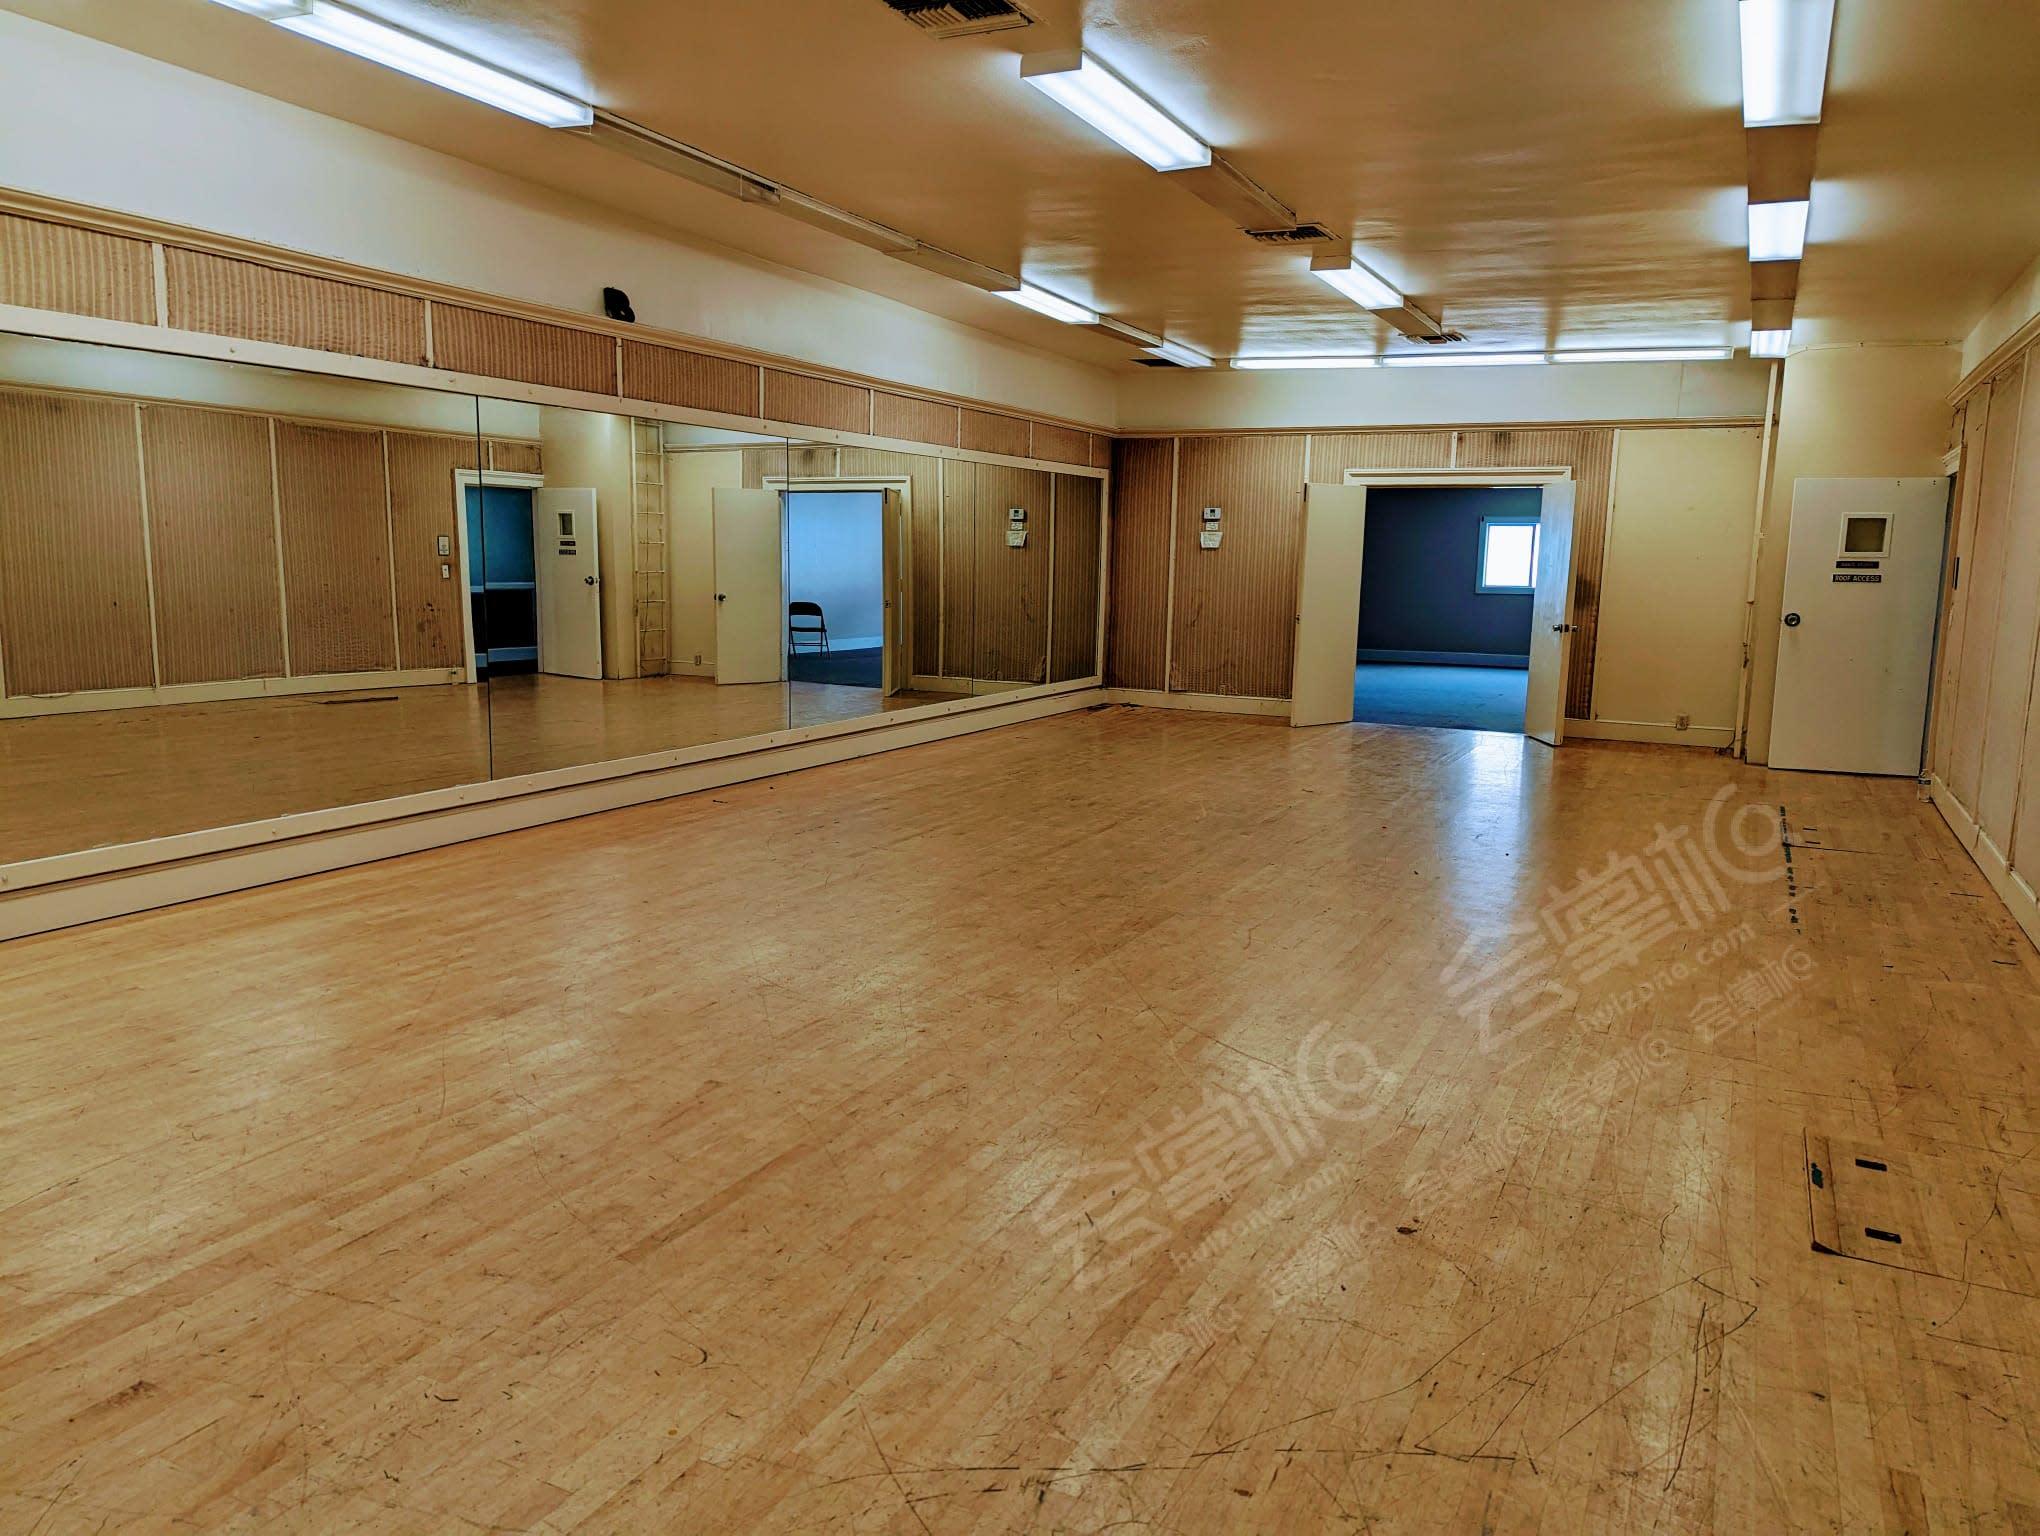 Theater with Dance Studio, Lobby, and Many Breakout Spaces